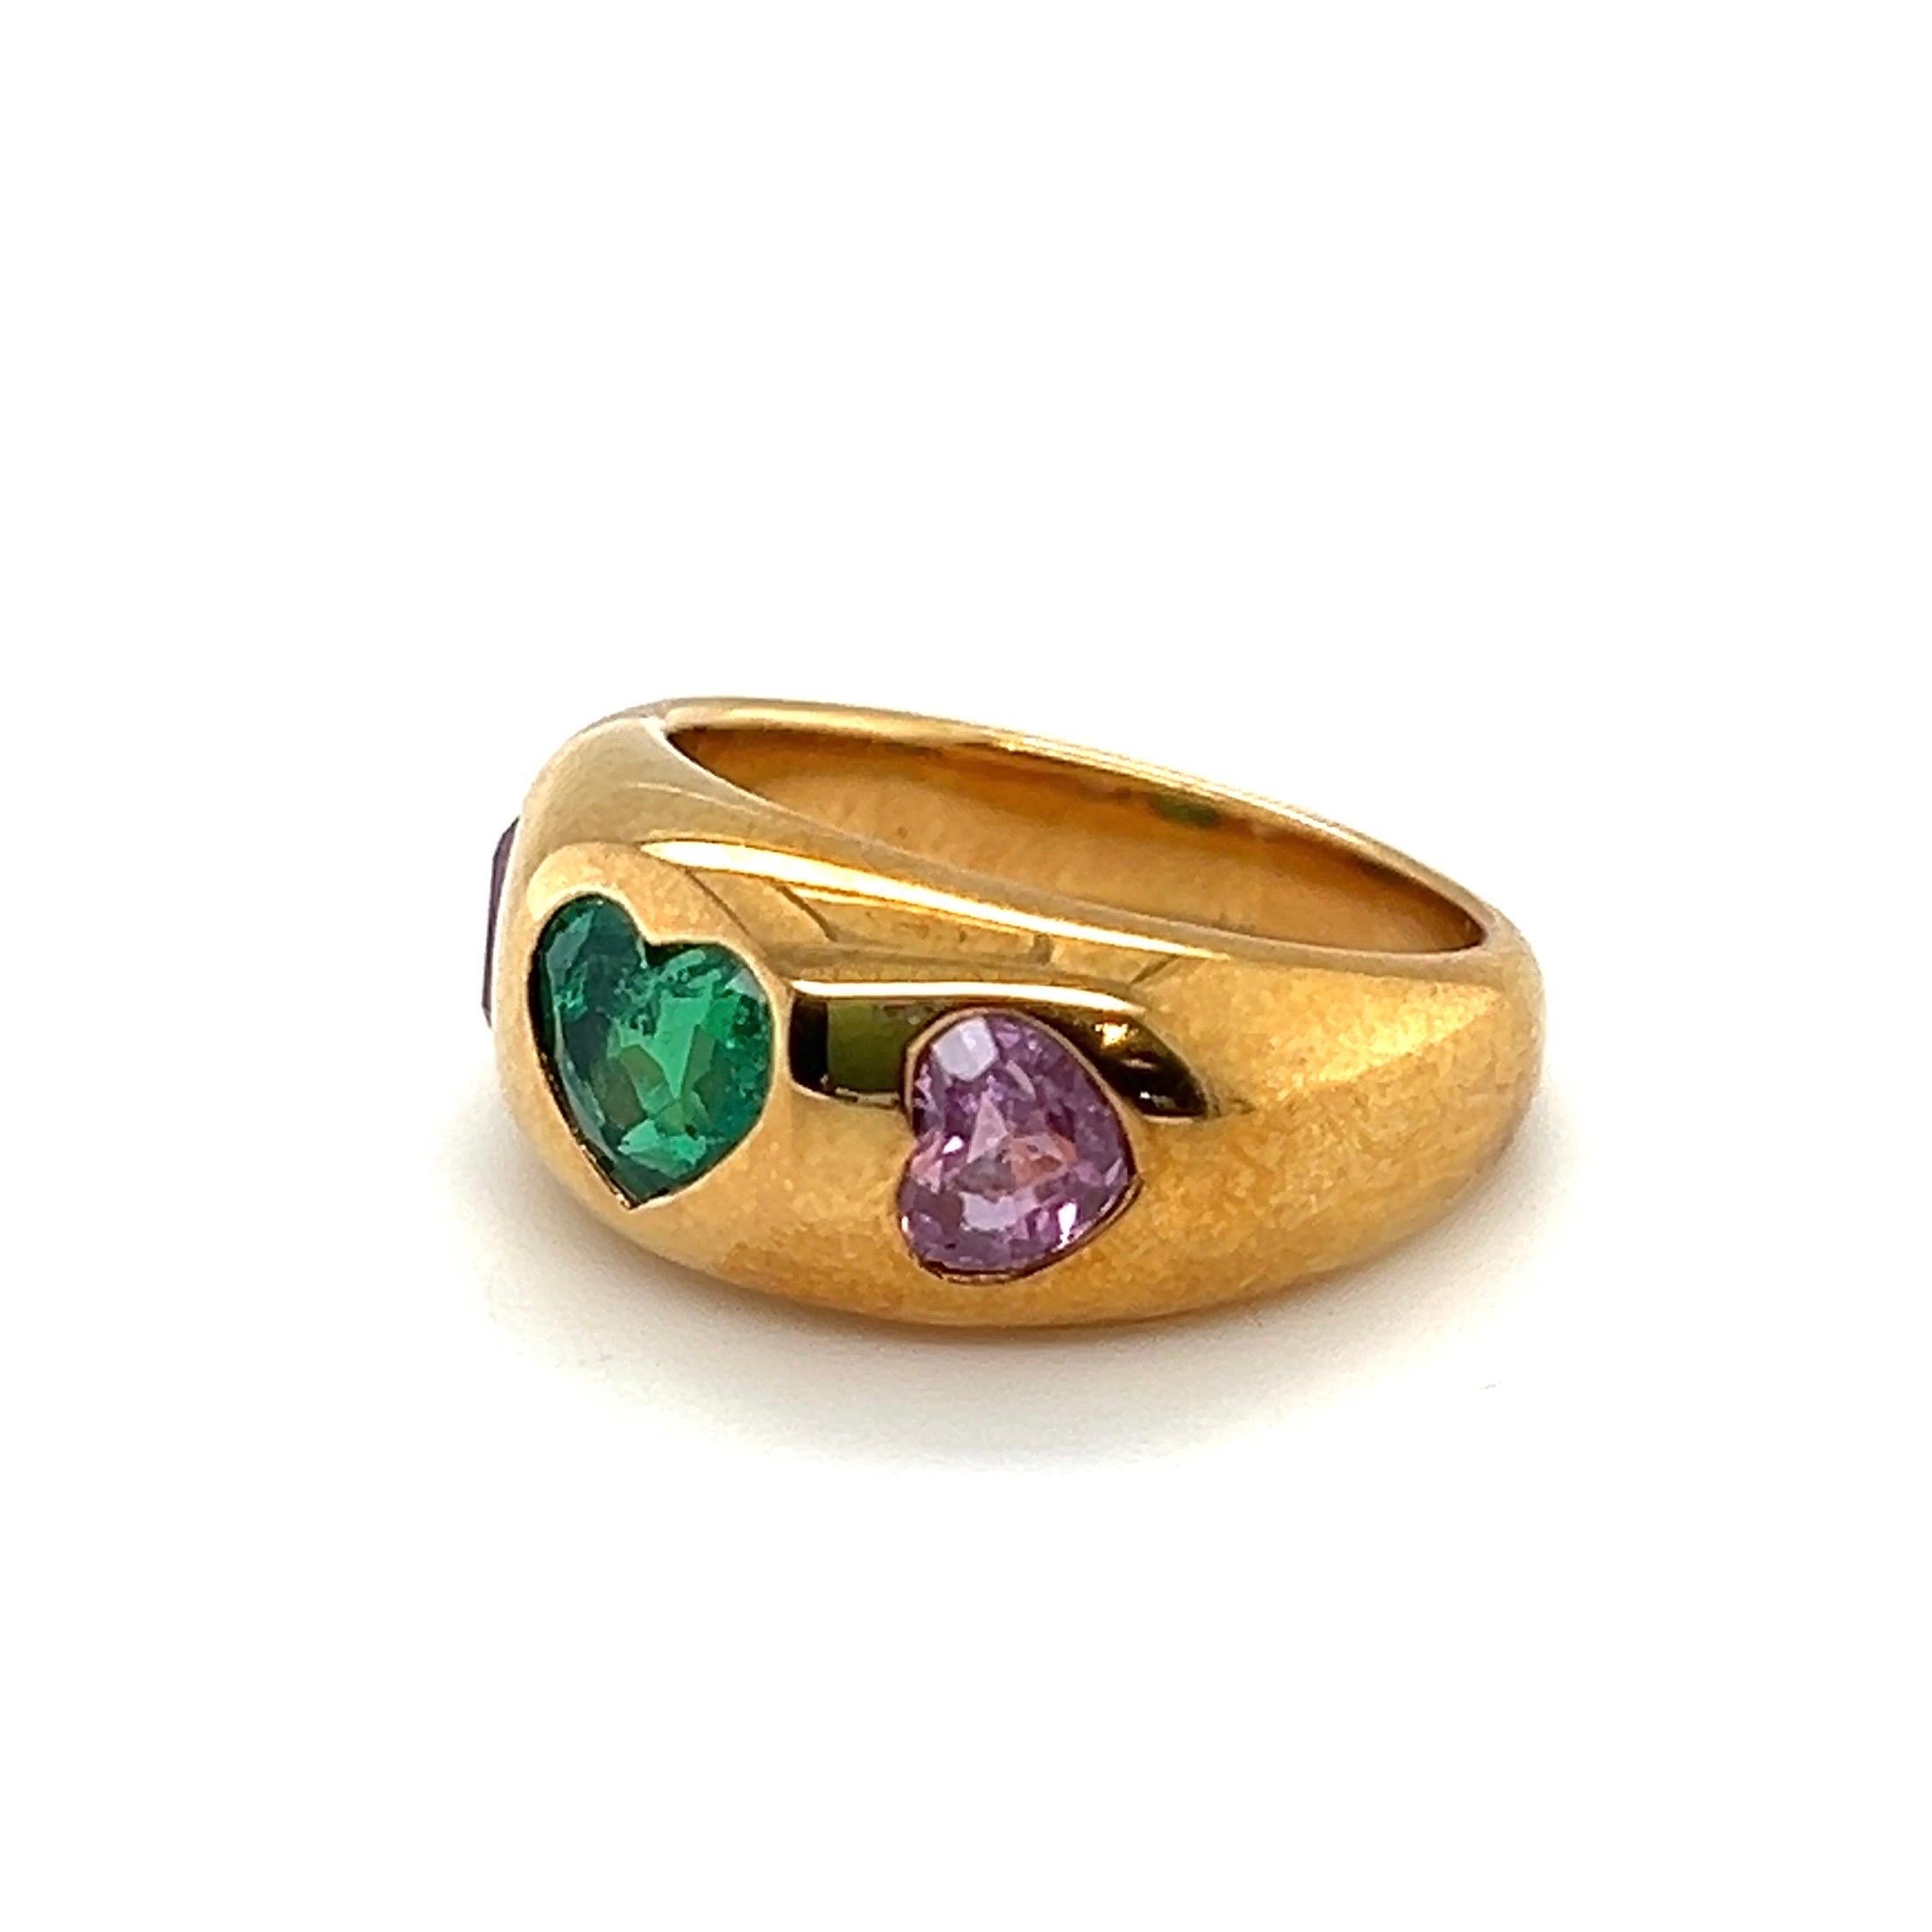 Adorable 18 karat yellow gold, emerald and pink sapphire band ring by the renowned Italian brand Bvlgari.

Crafted in 18 karat yellow gold, slightly bombé band ring decorated with a fine, vibrant green heart-shaped emerald of approximately 0.8